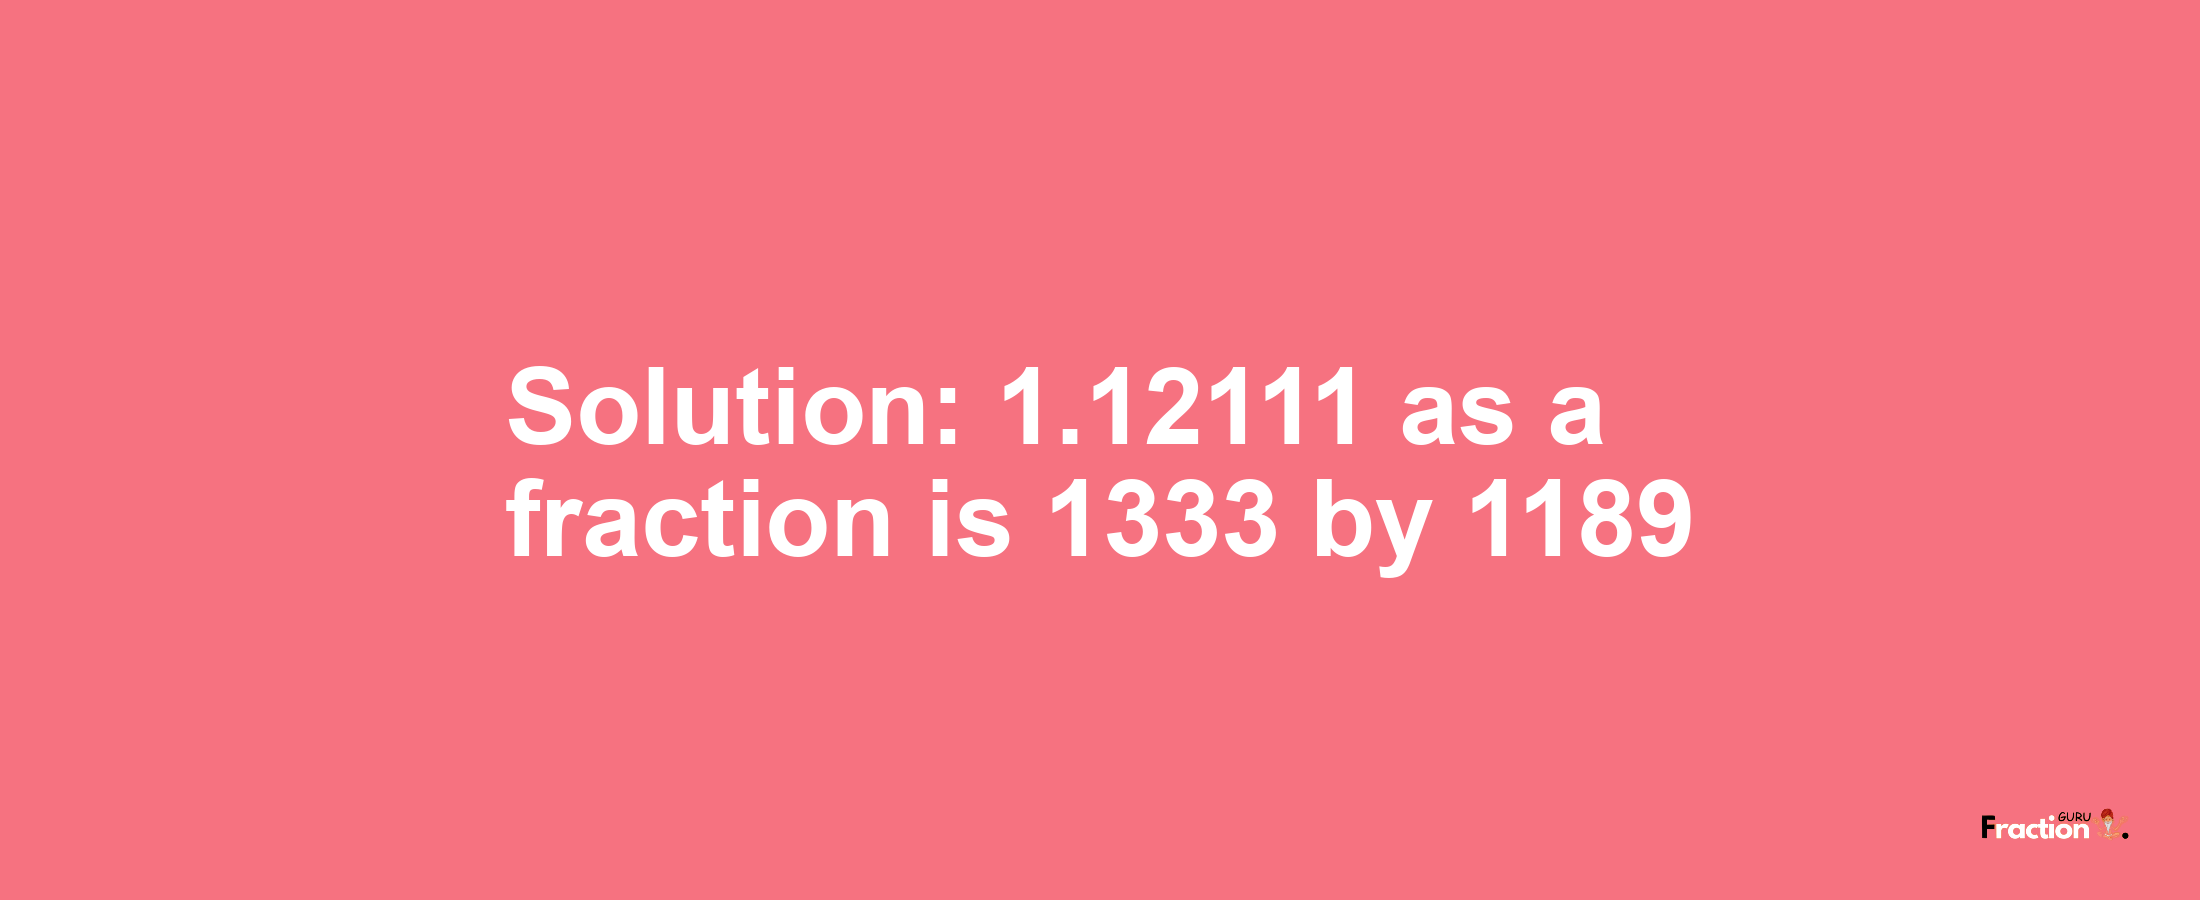 Solution:1.12111 as a fraction is 1333/1189